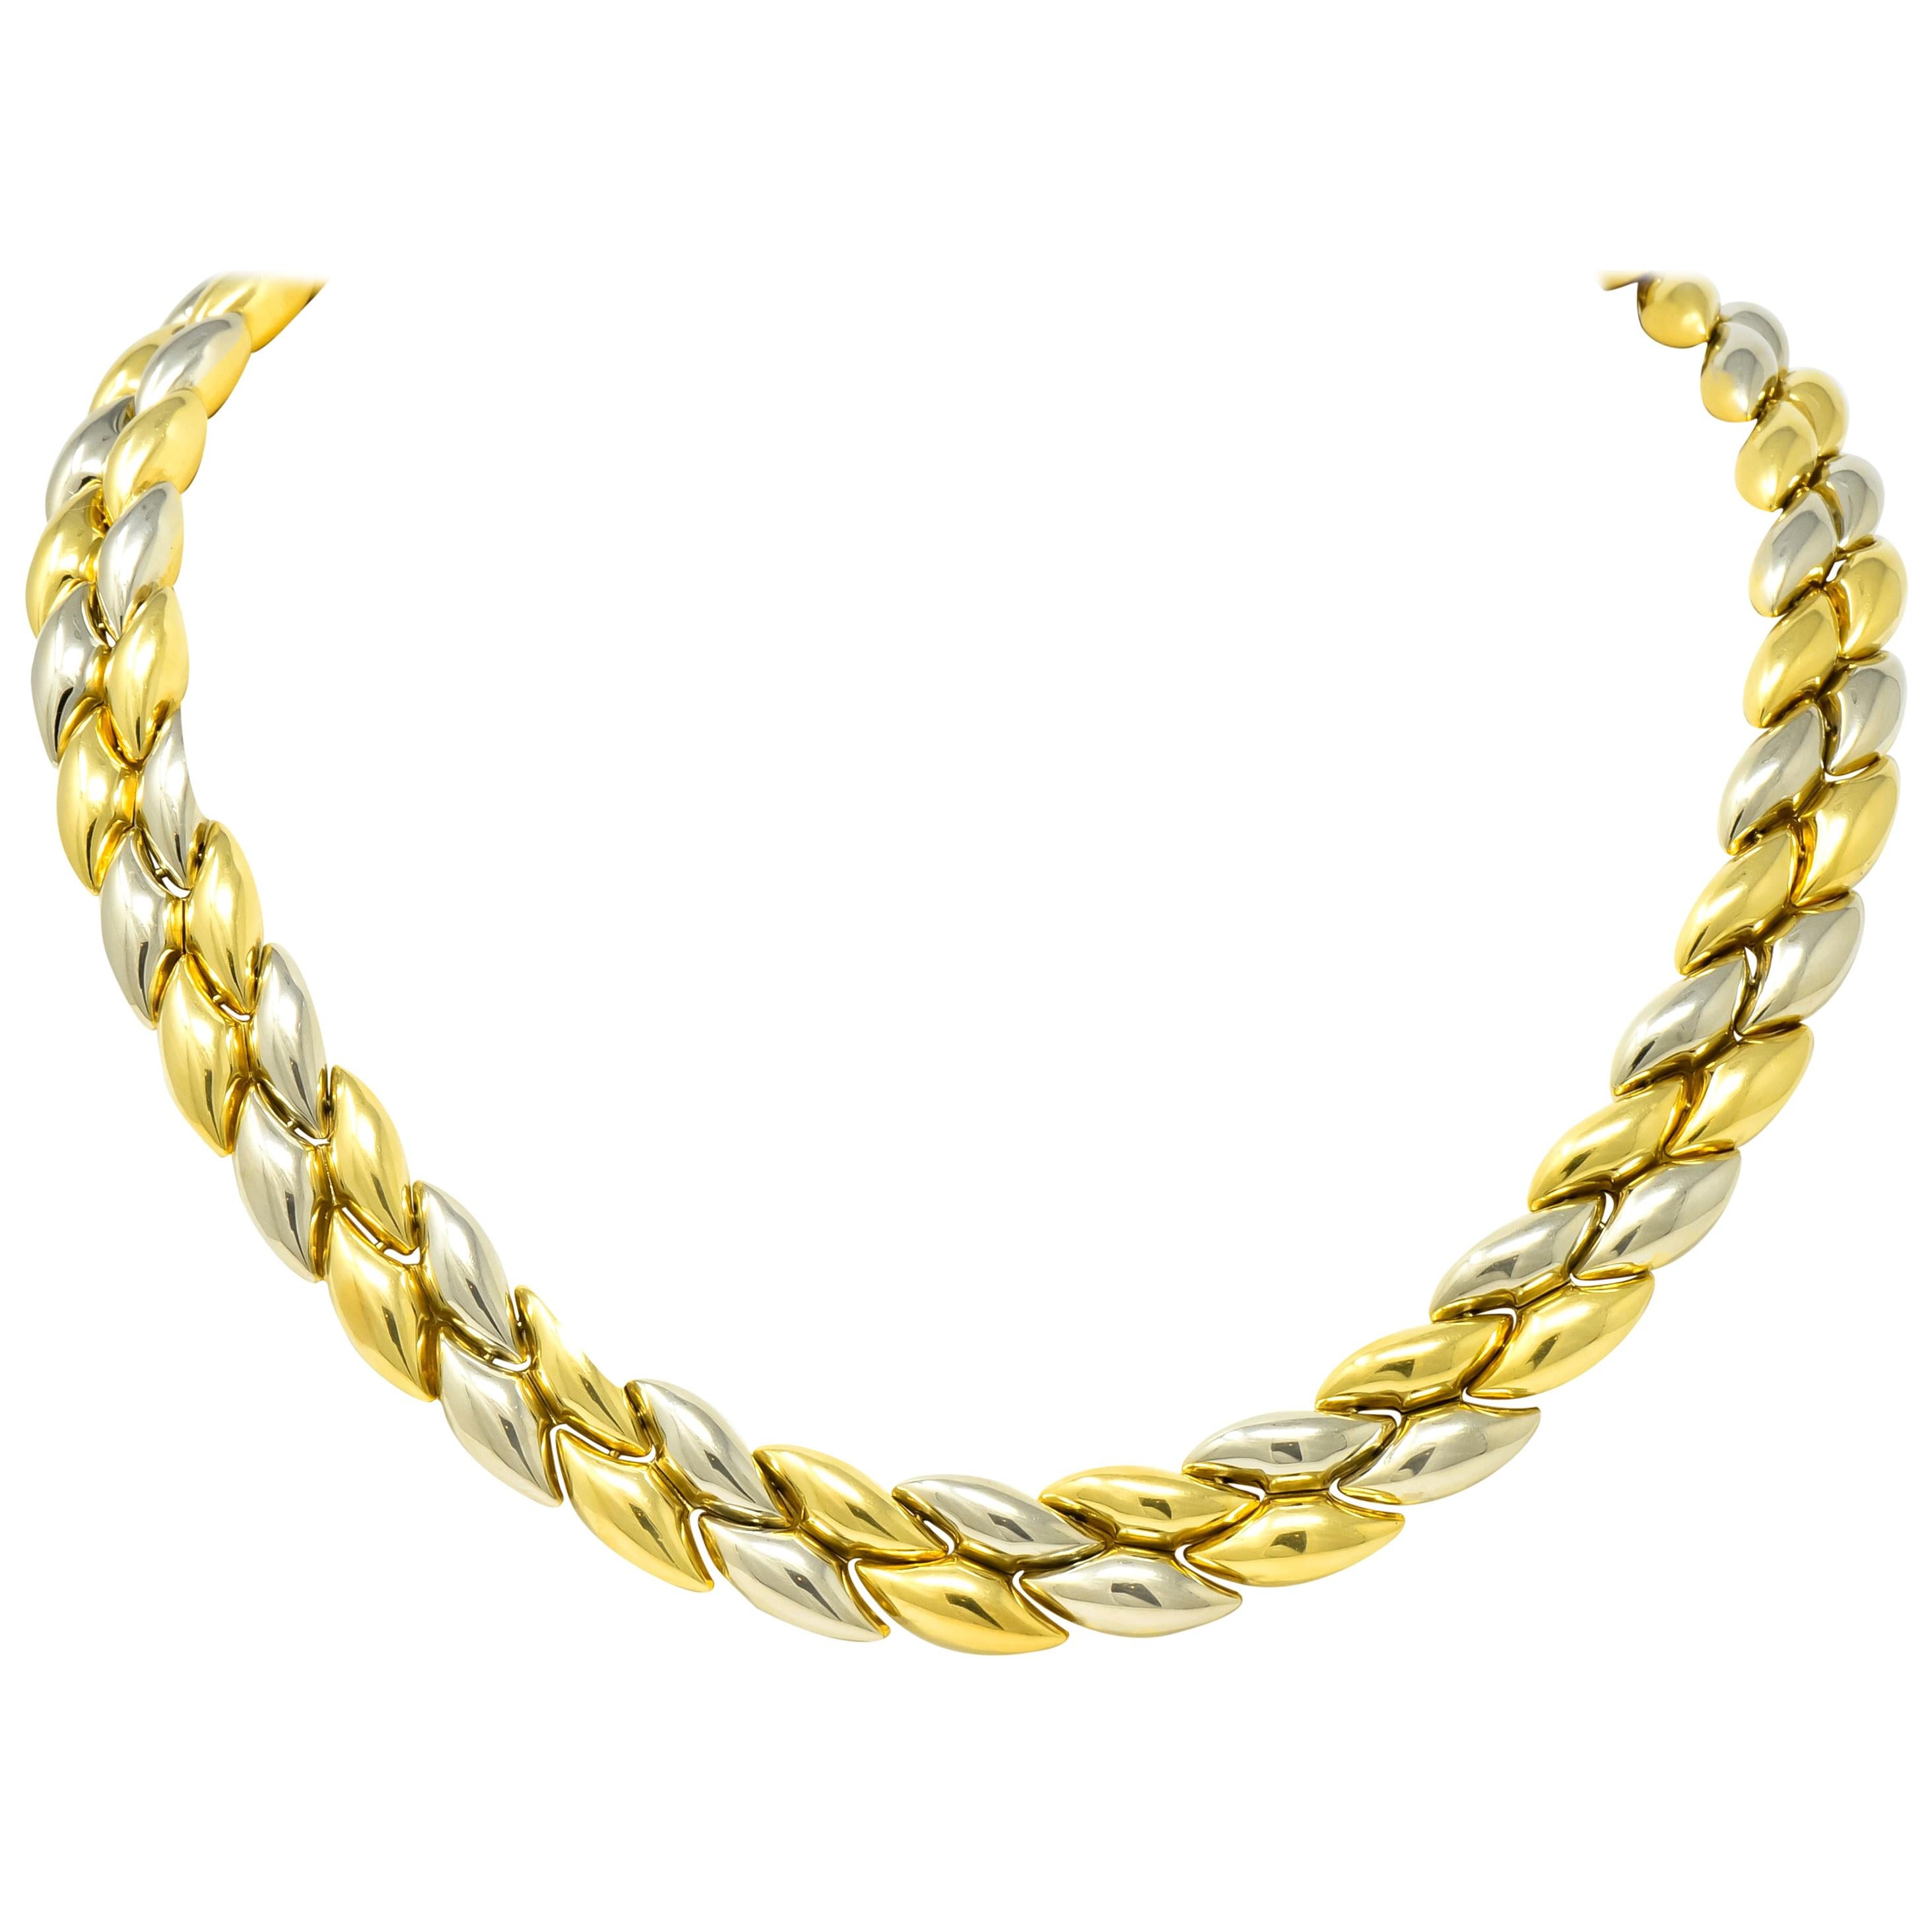 Chimento 18 Karat Two-Tone Gold Italian Puffed Reversible Collar Necklace